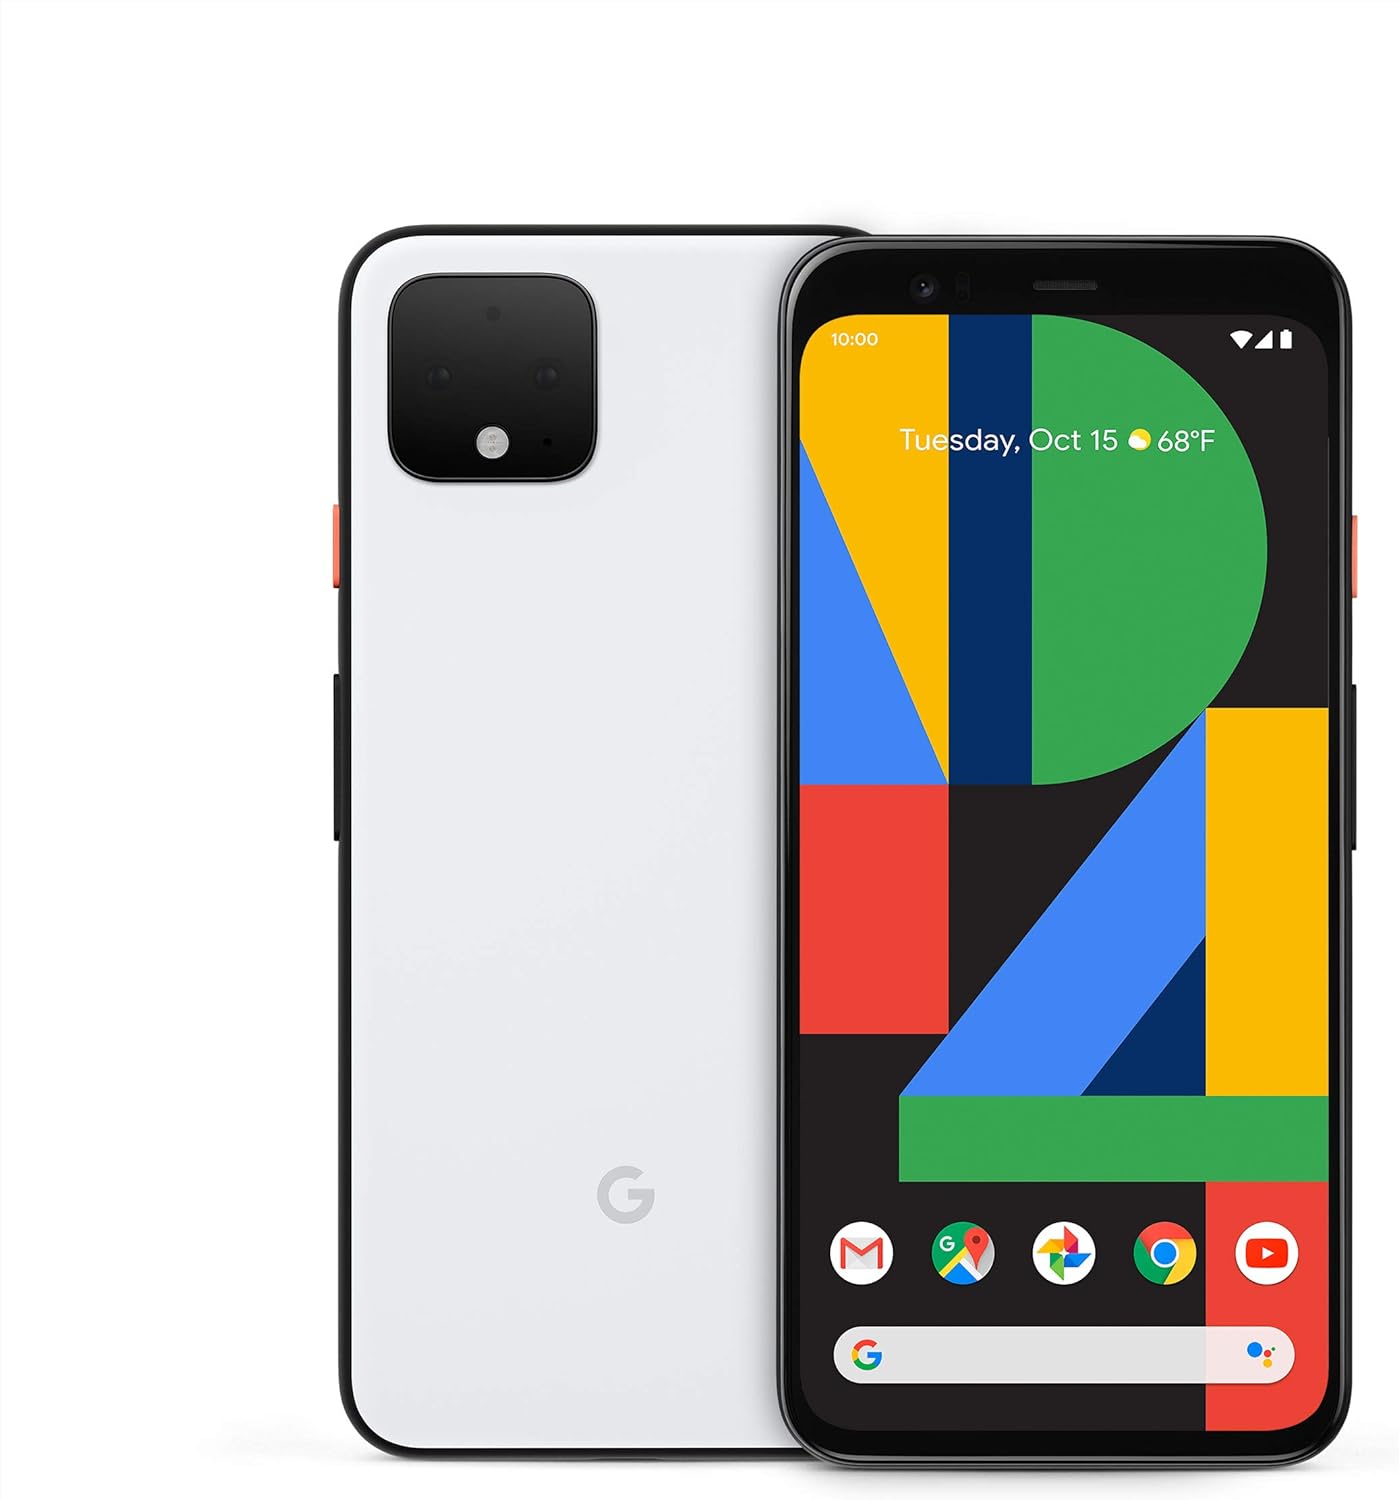 Pricing Changes: Will Pixel 3 Get Cheaper After Google Pixel 4 Release?